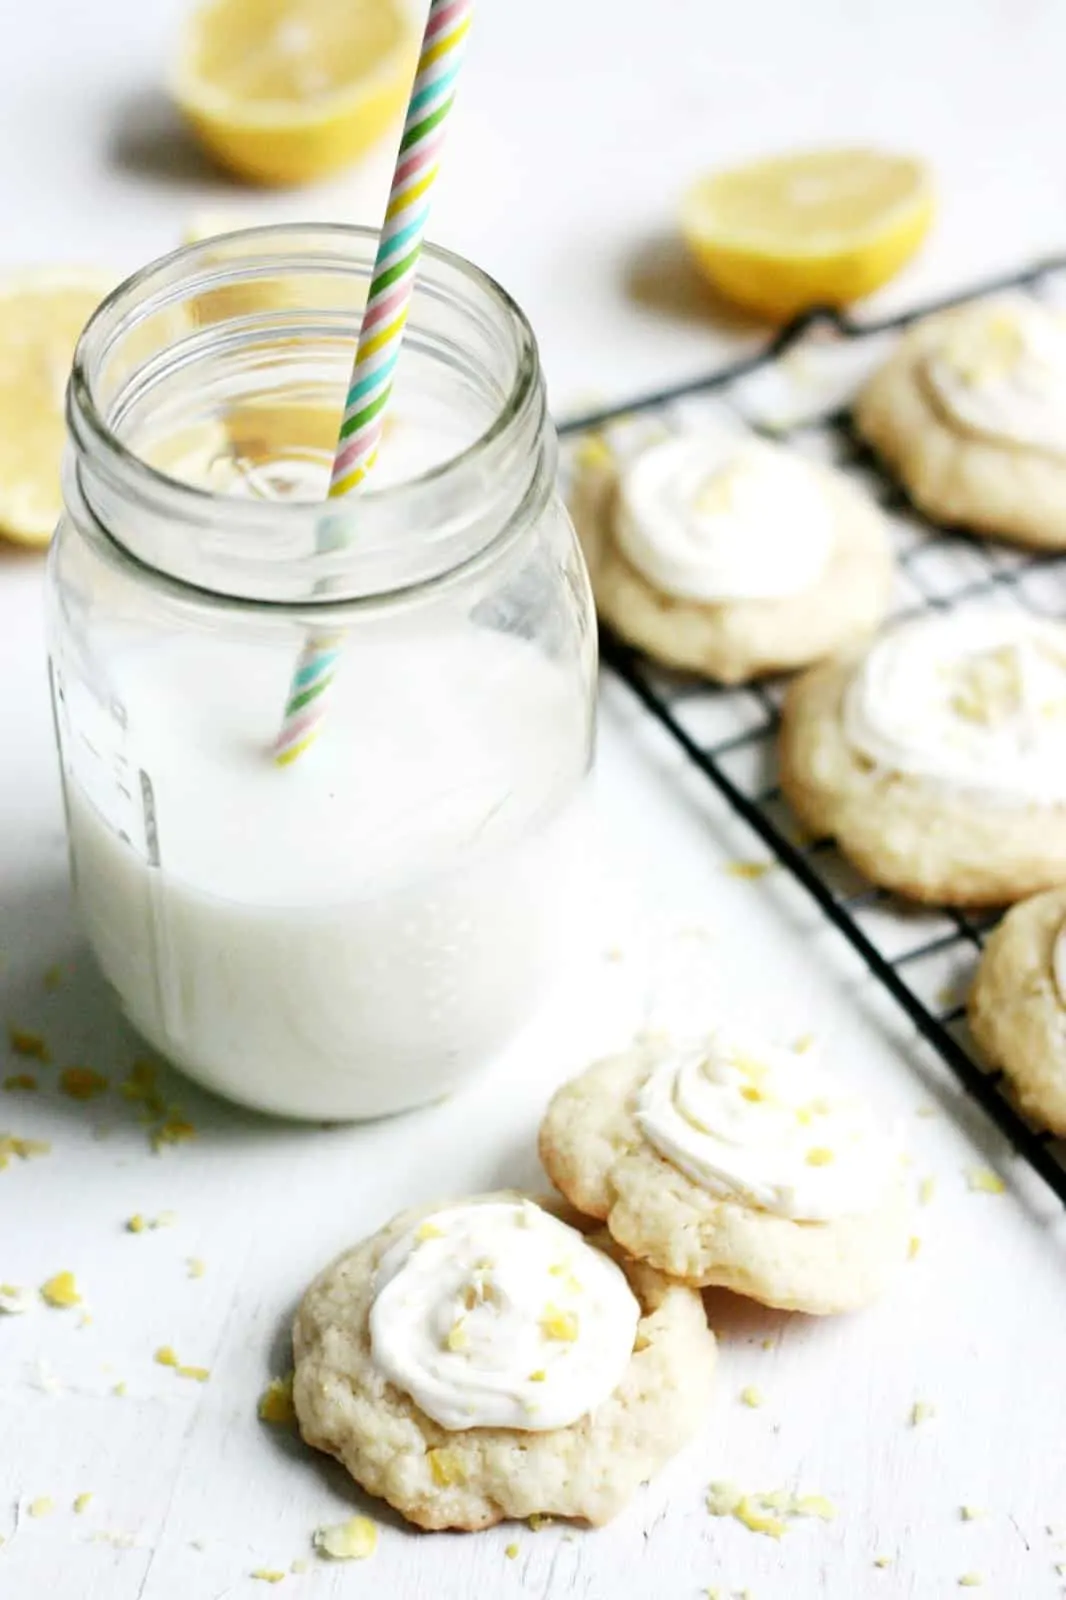 lemon cookies with icing and a mason jar glass of milk with a colorful straw